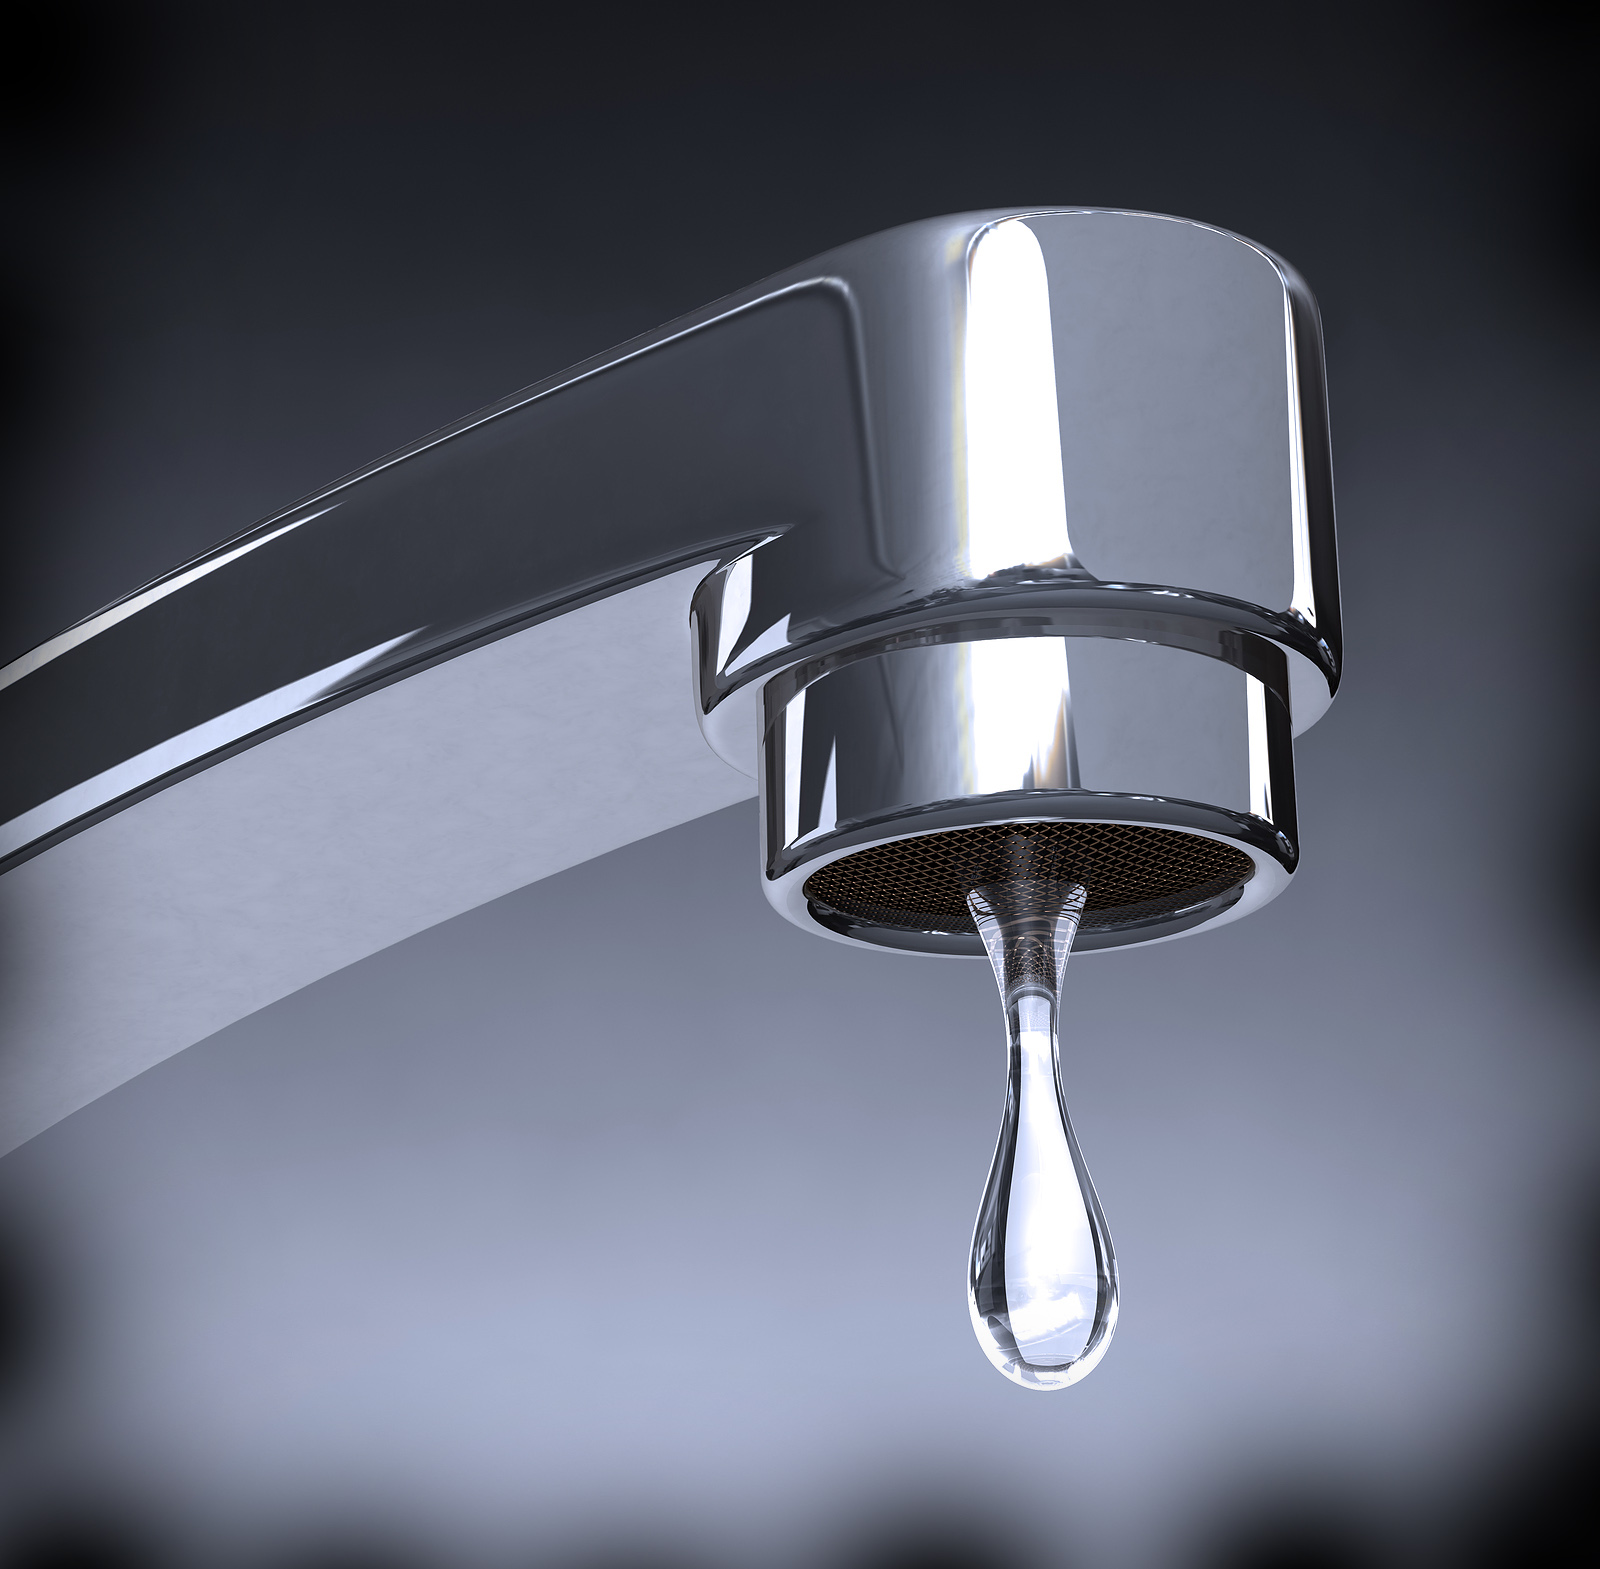 A water 24/7 Emergency Plumbing Service in Ampthill depicted by a photograph of a faucet with a droplet.